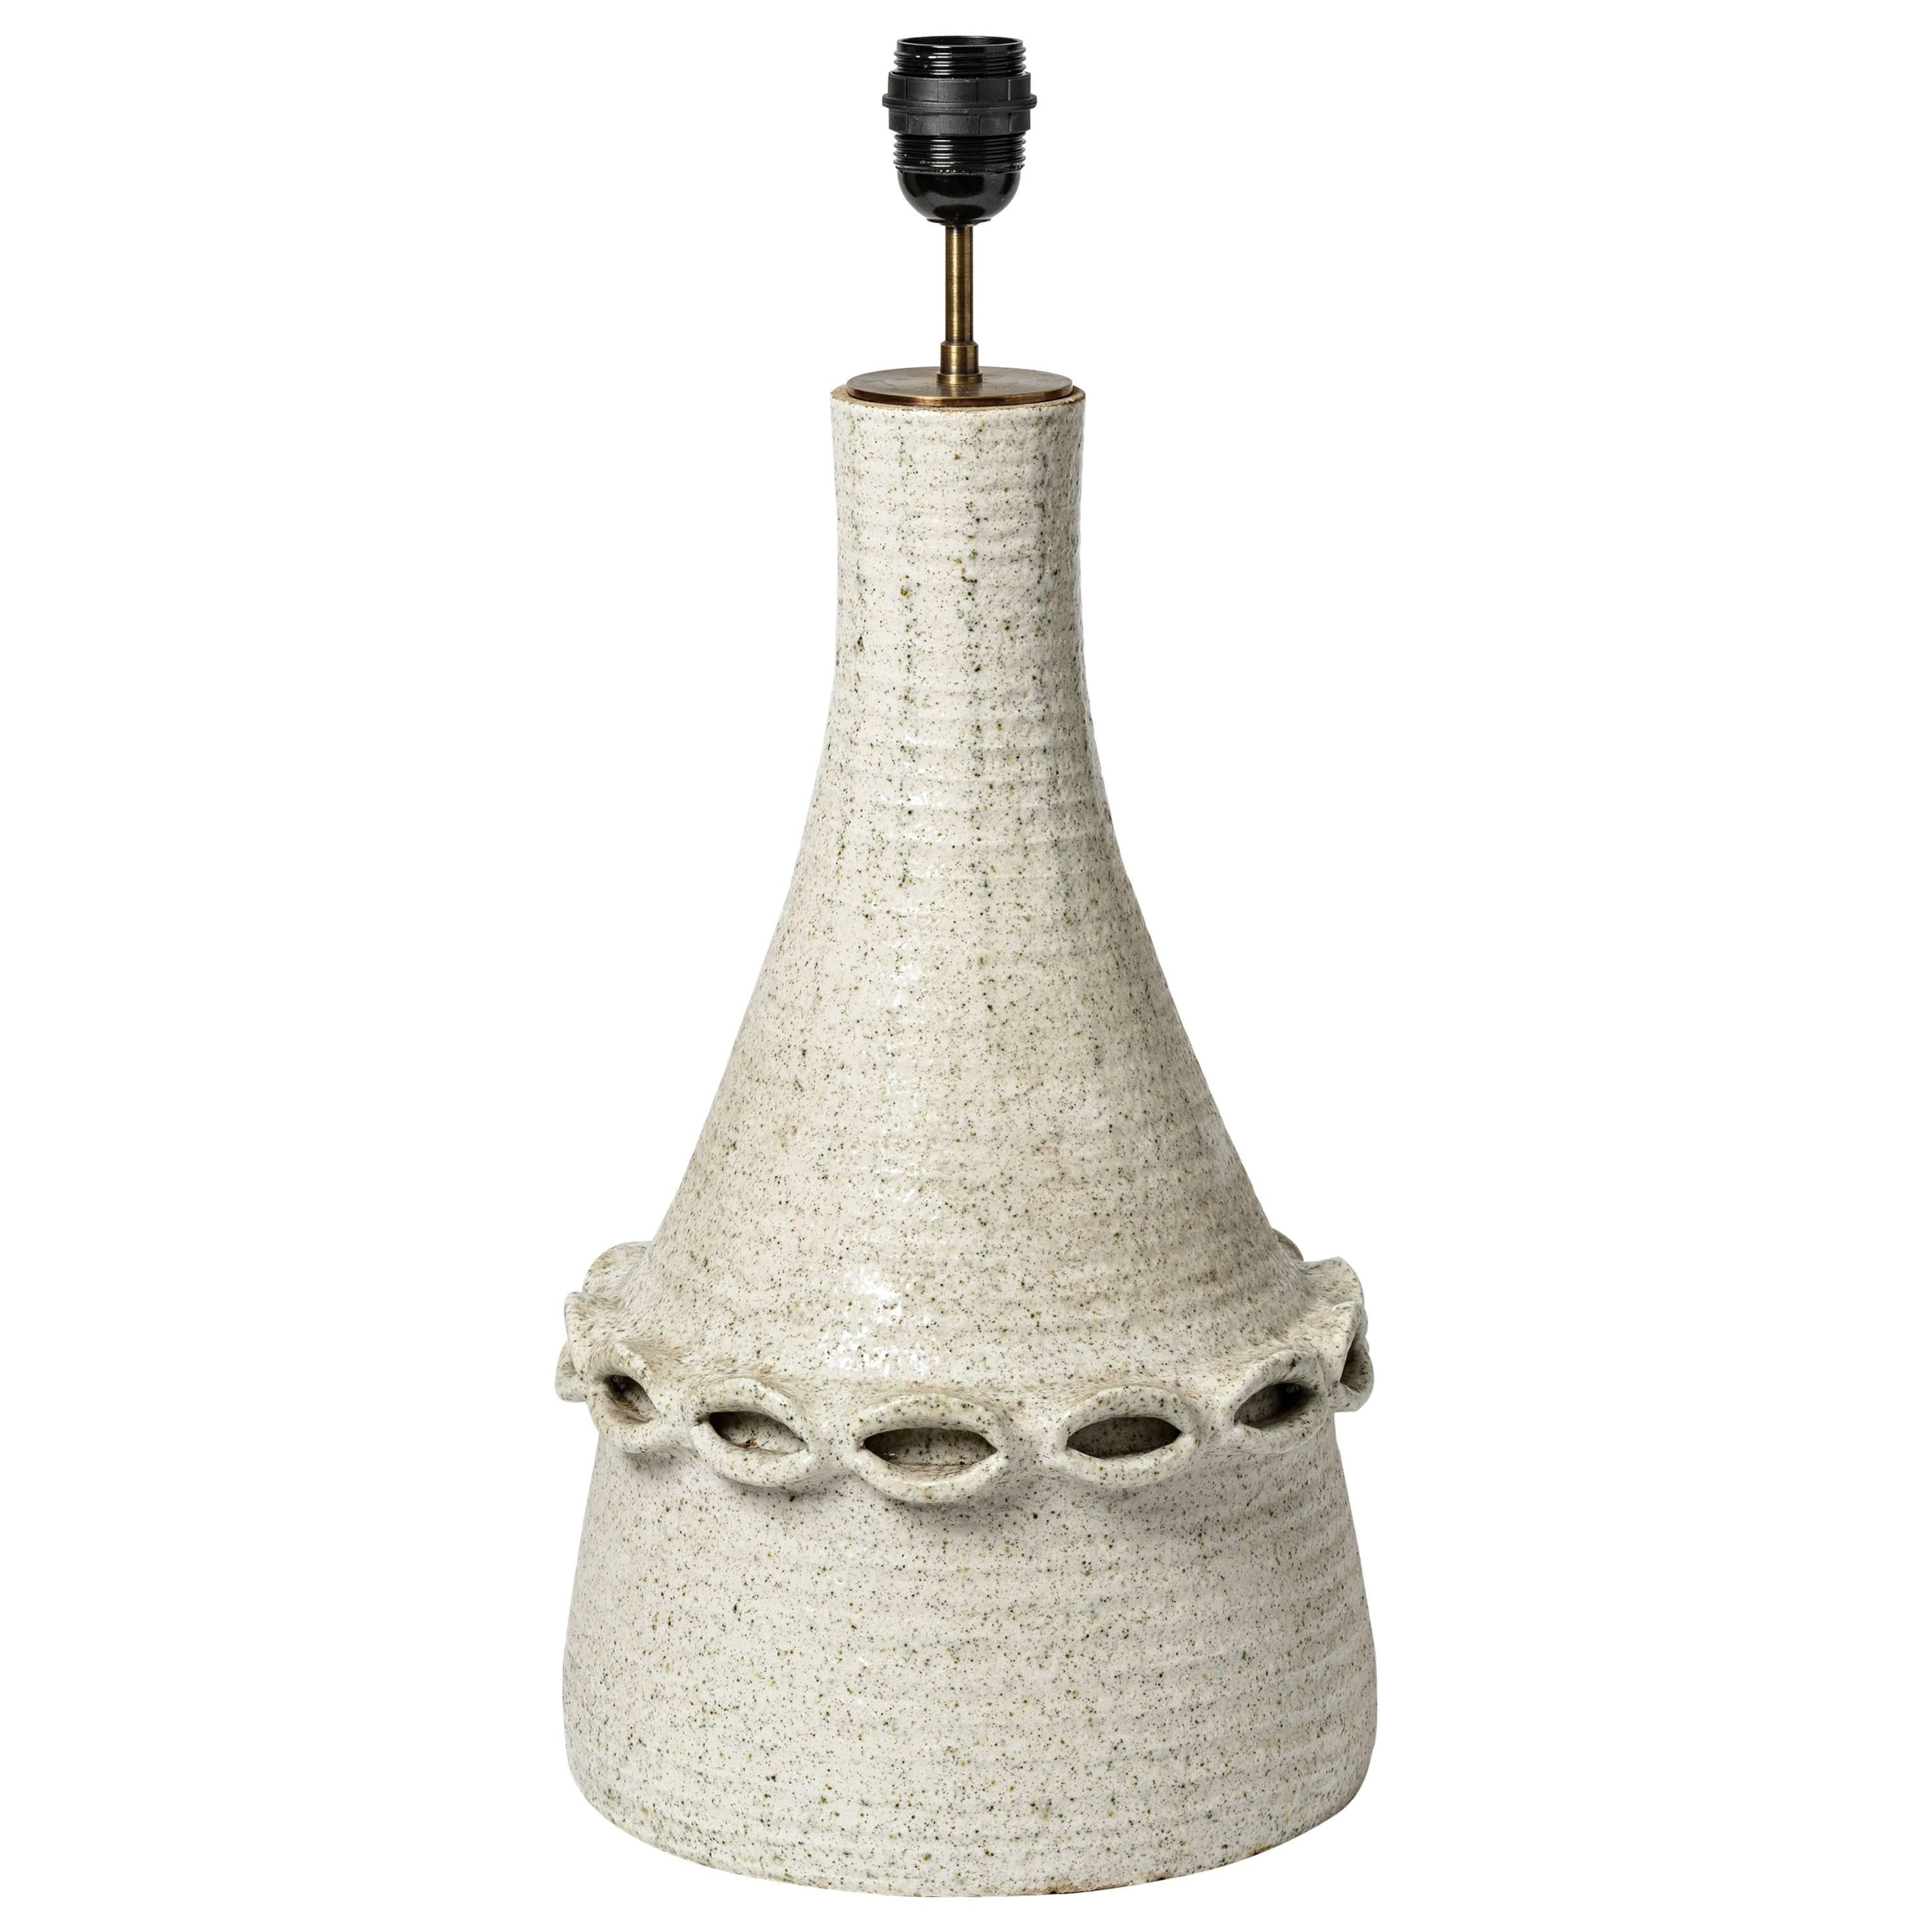 Ceramic Lamp by Accolay with White Glaze Decoration, circa 1970